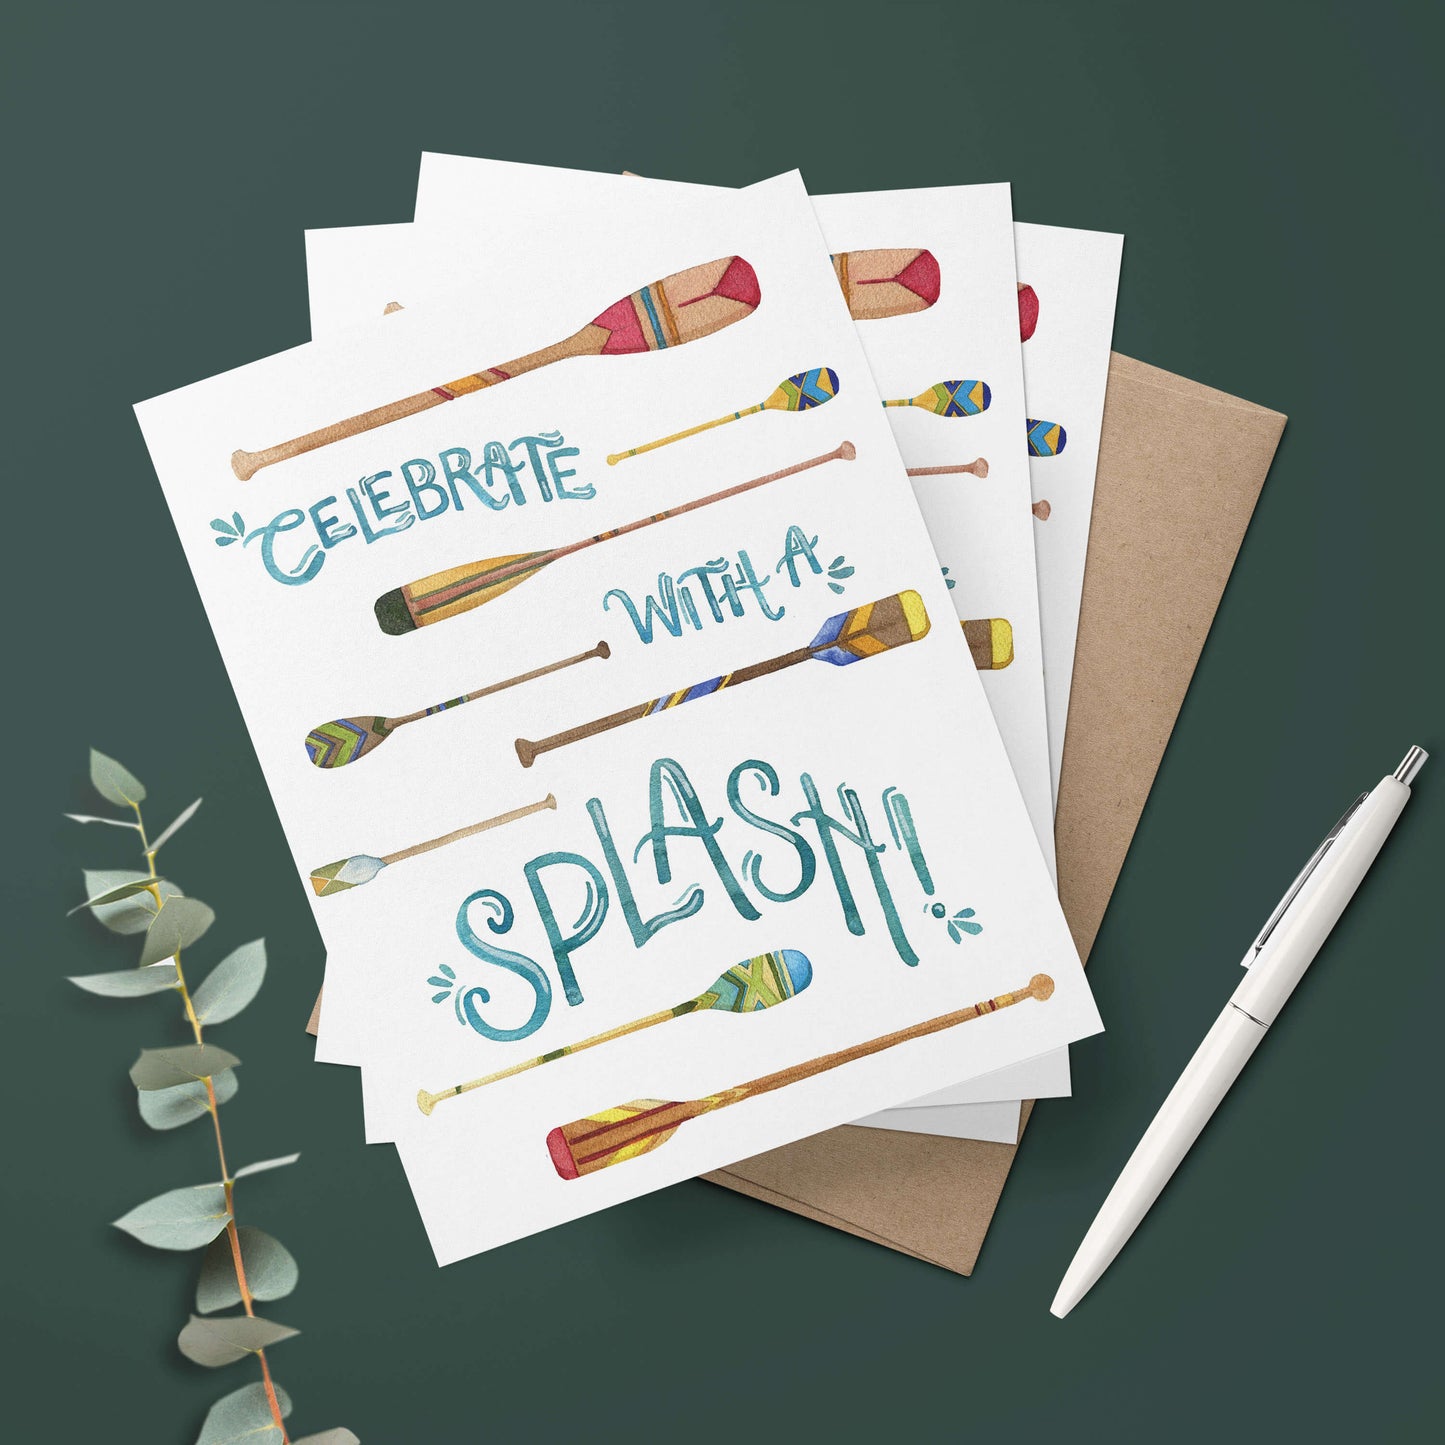 Celebrate with a Splash | Birthday and Congratulations Greeting Card